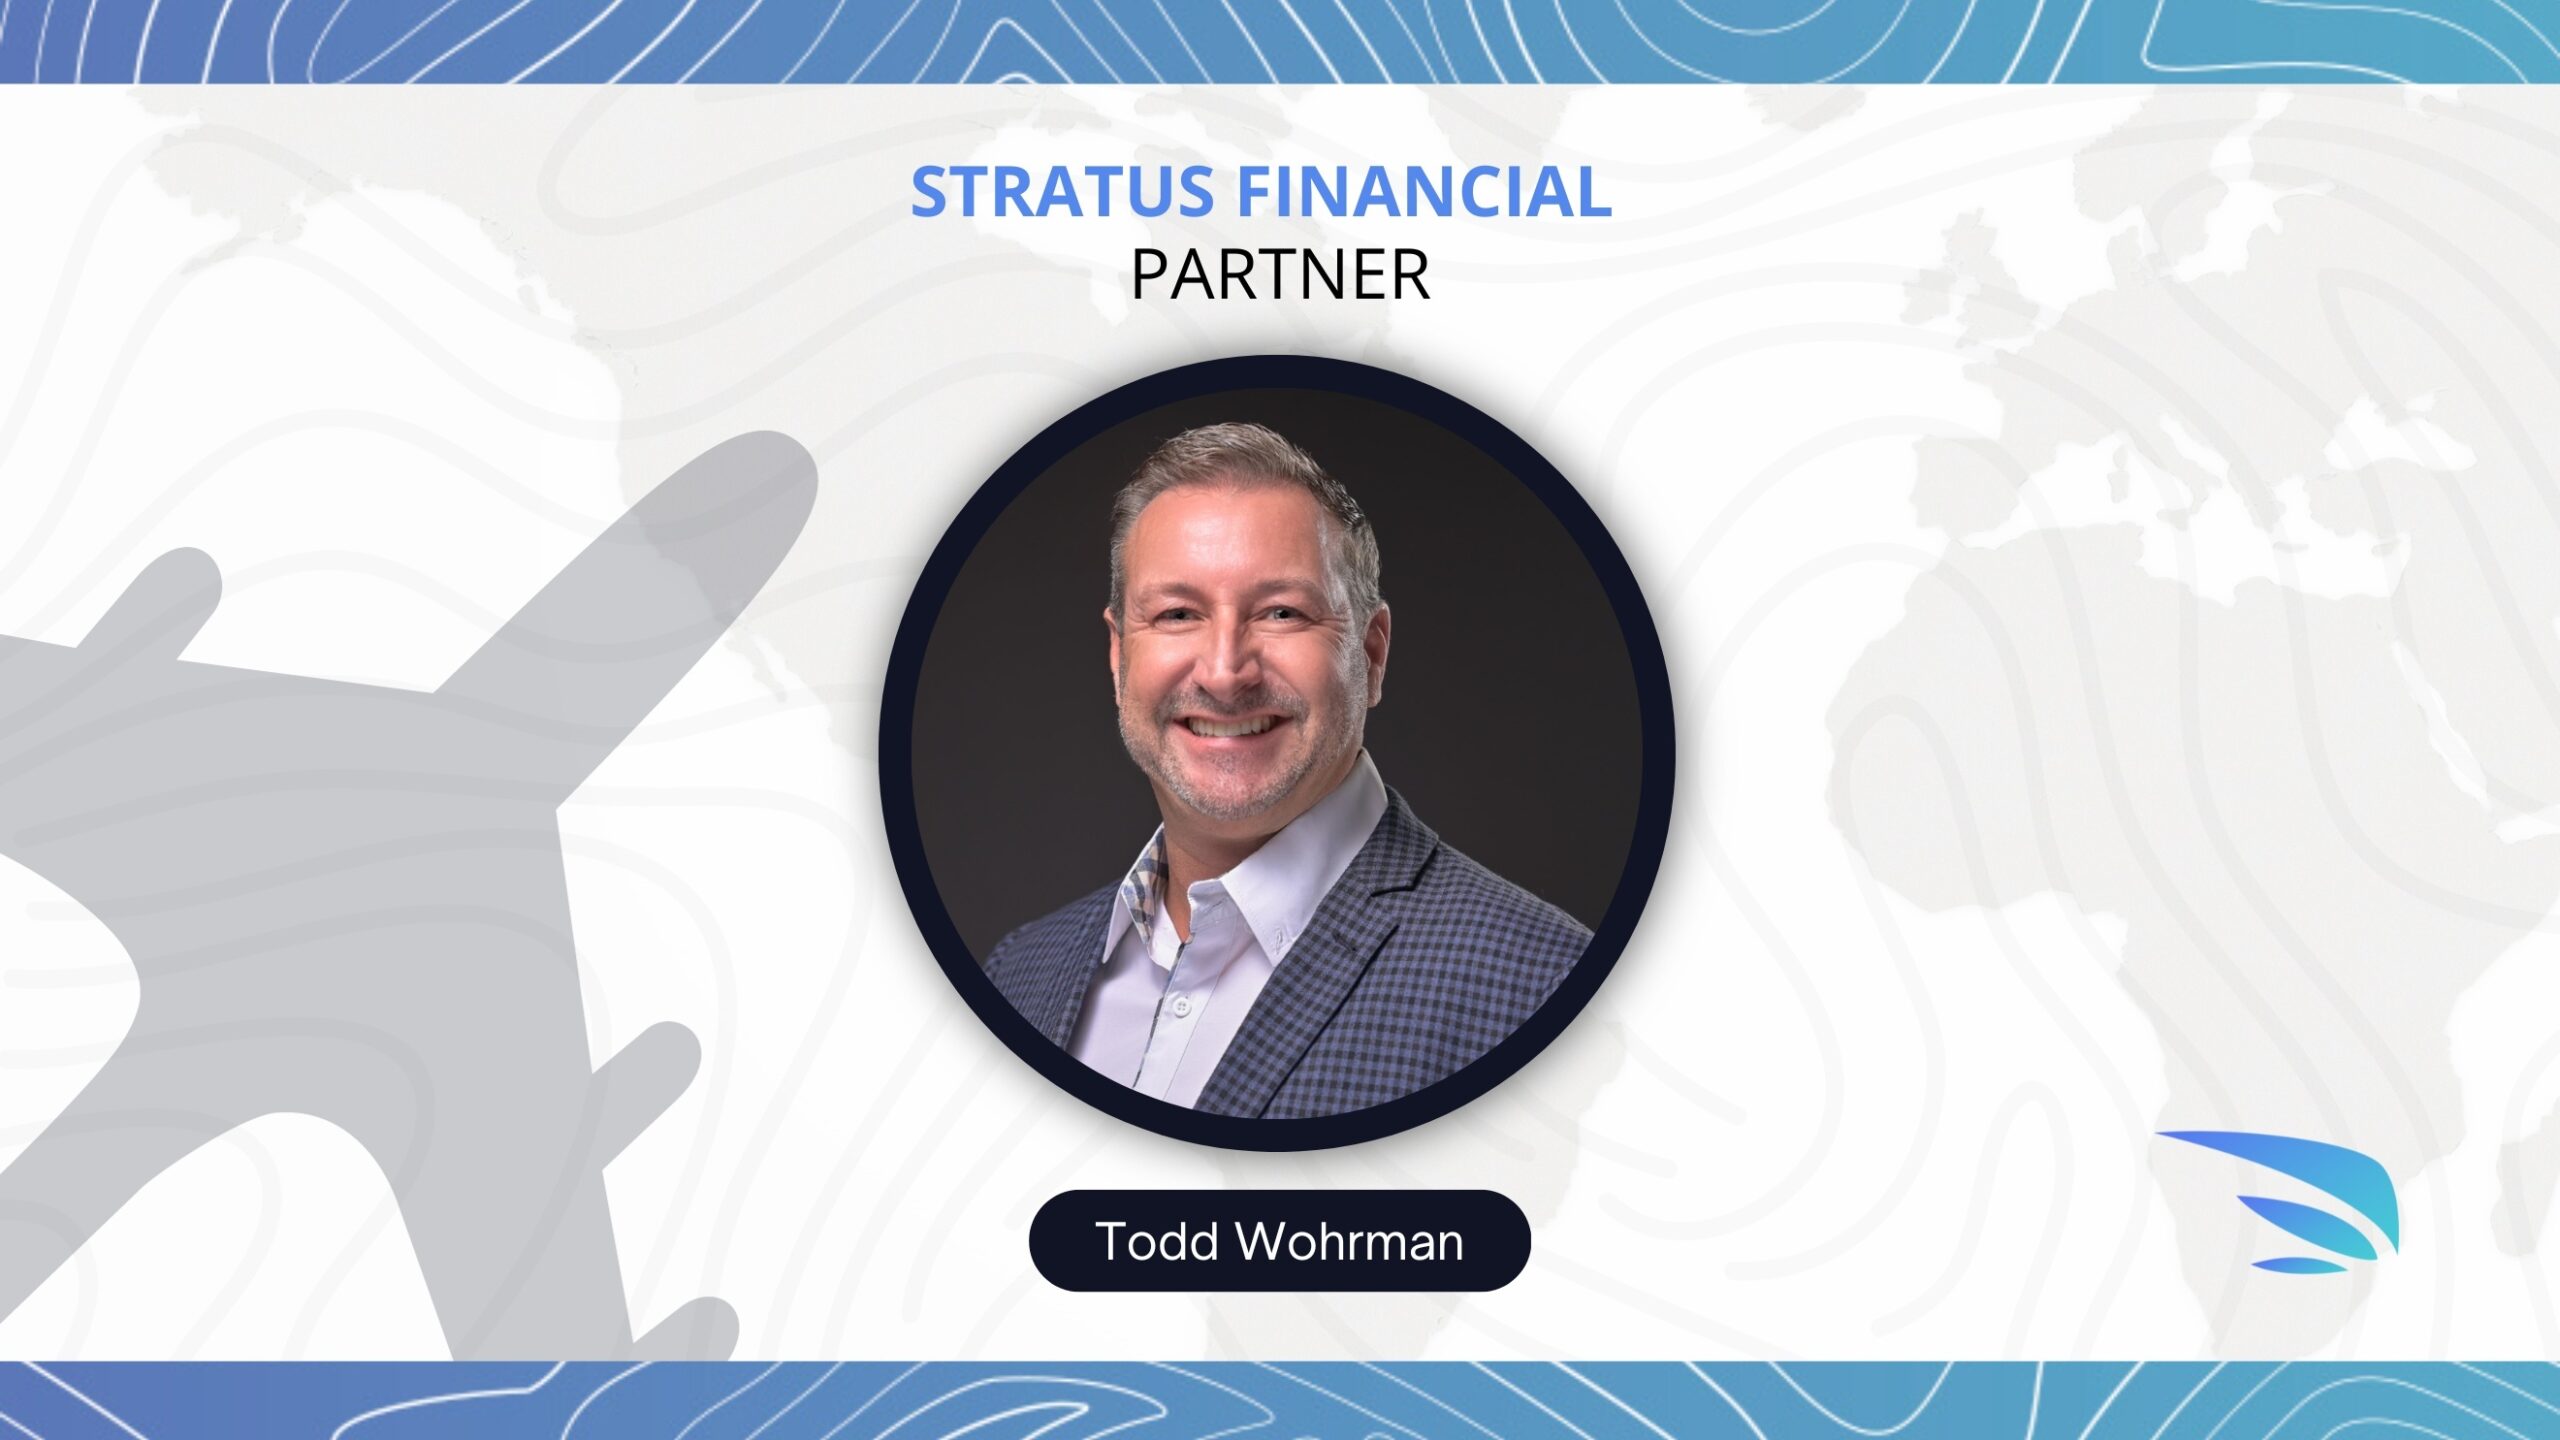 New Partner, Todd Wohrman, joins Stratus Financial to boost student loans for future pilots. Explore this partnership’s impact on aviation.